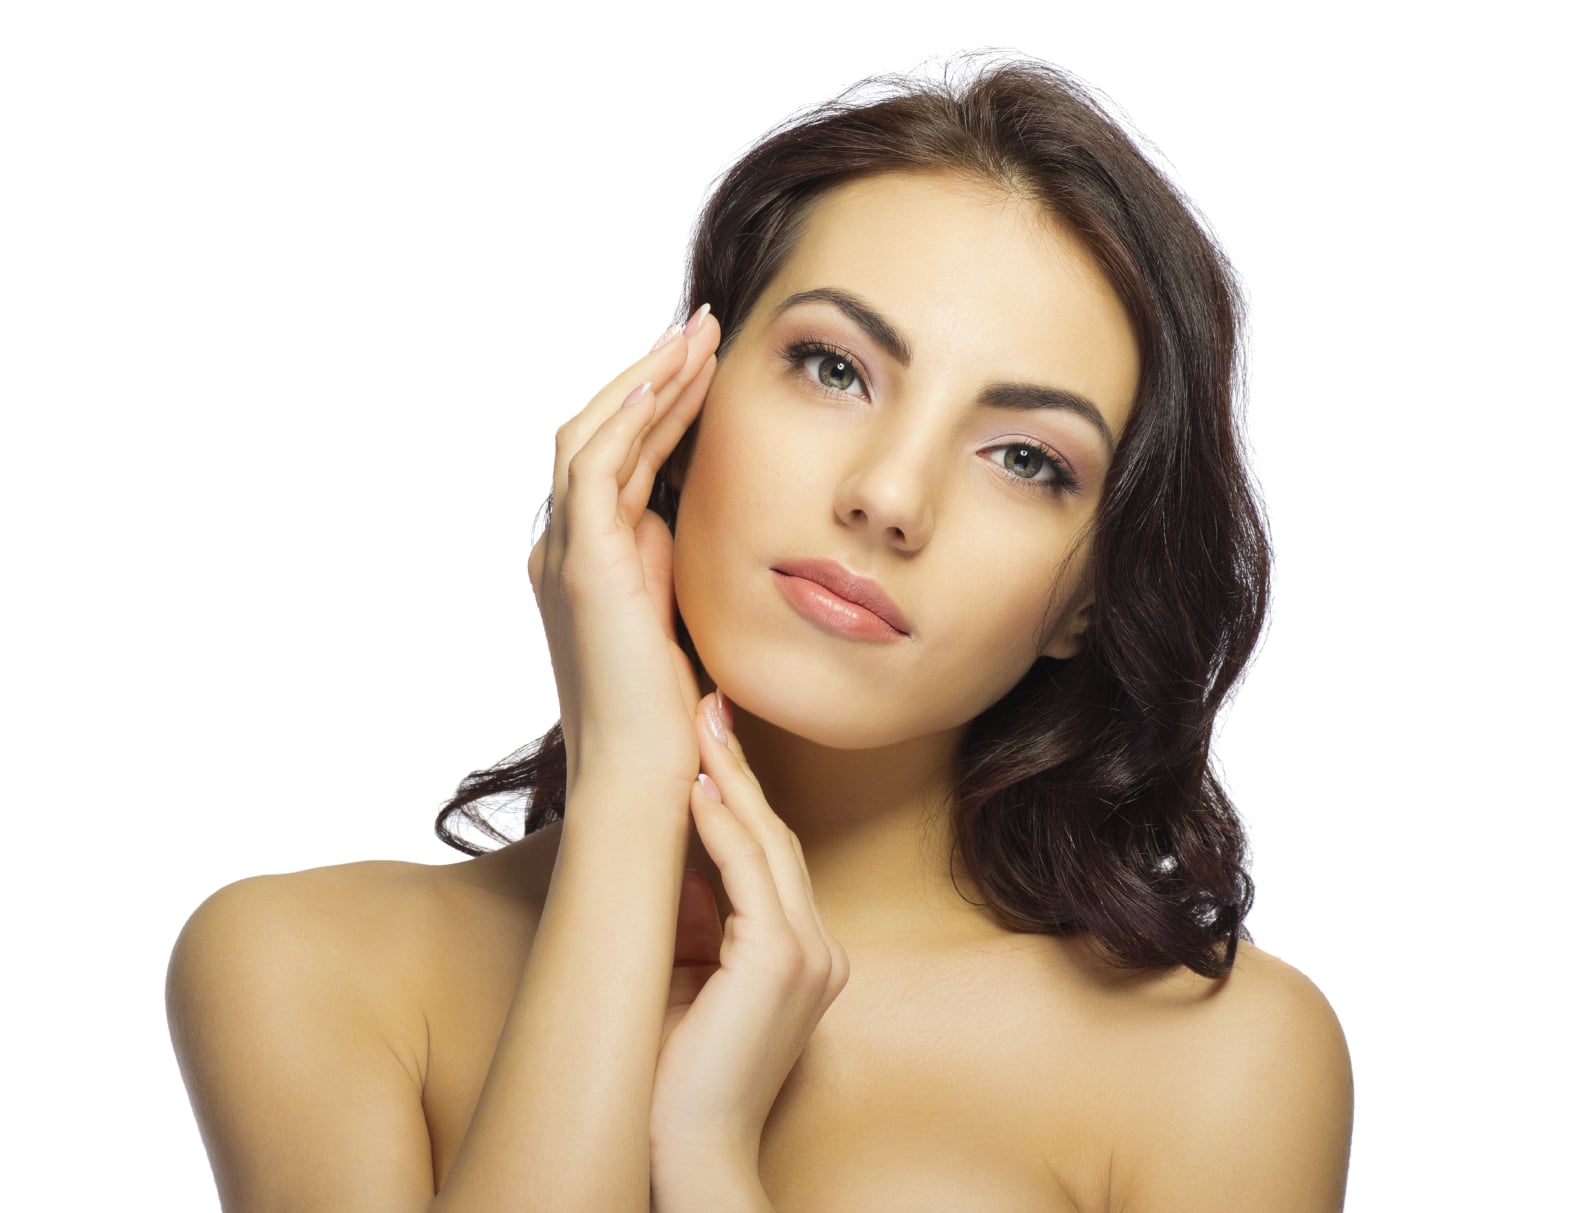 The Fda Has Issued A Warning: Have Qualified Surgeons Perform Your Facial Injections Newport Beach, CA